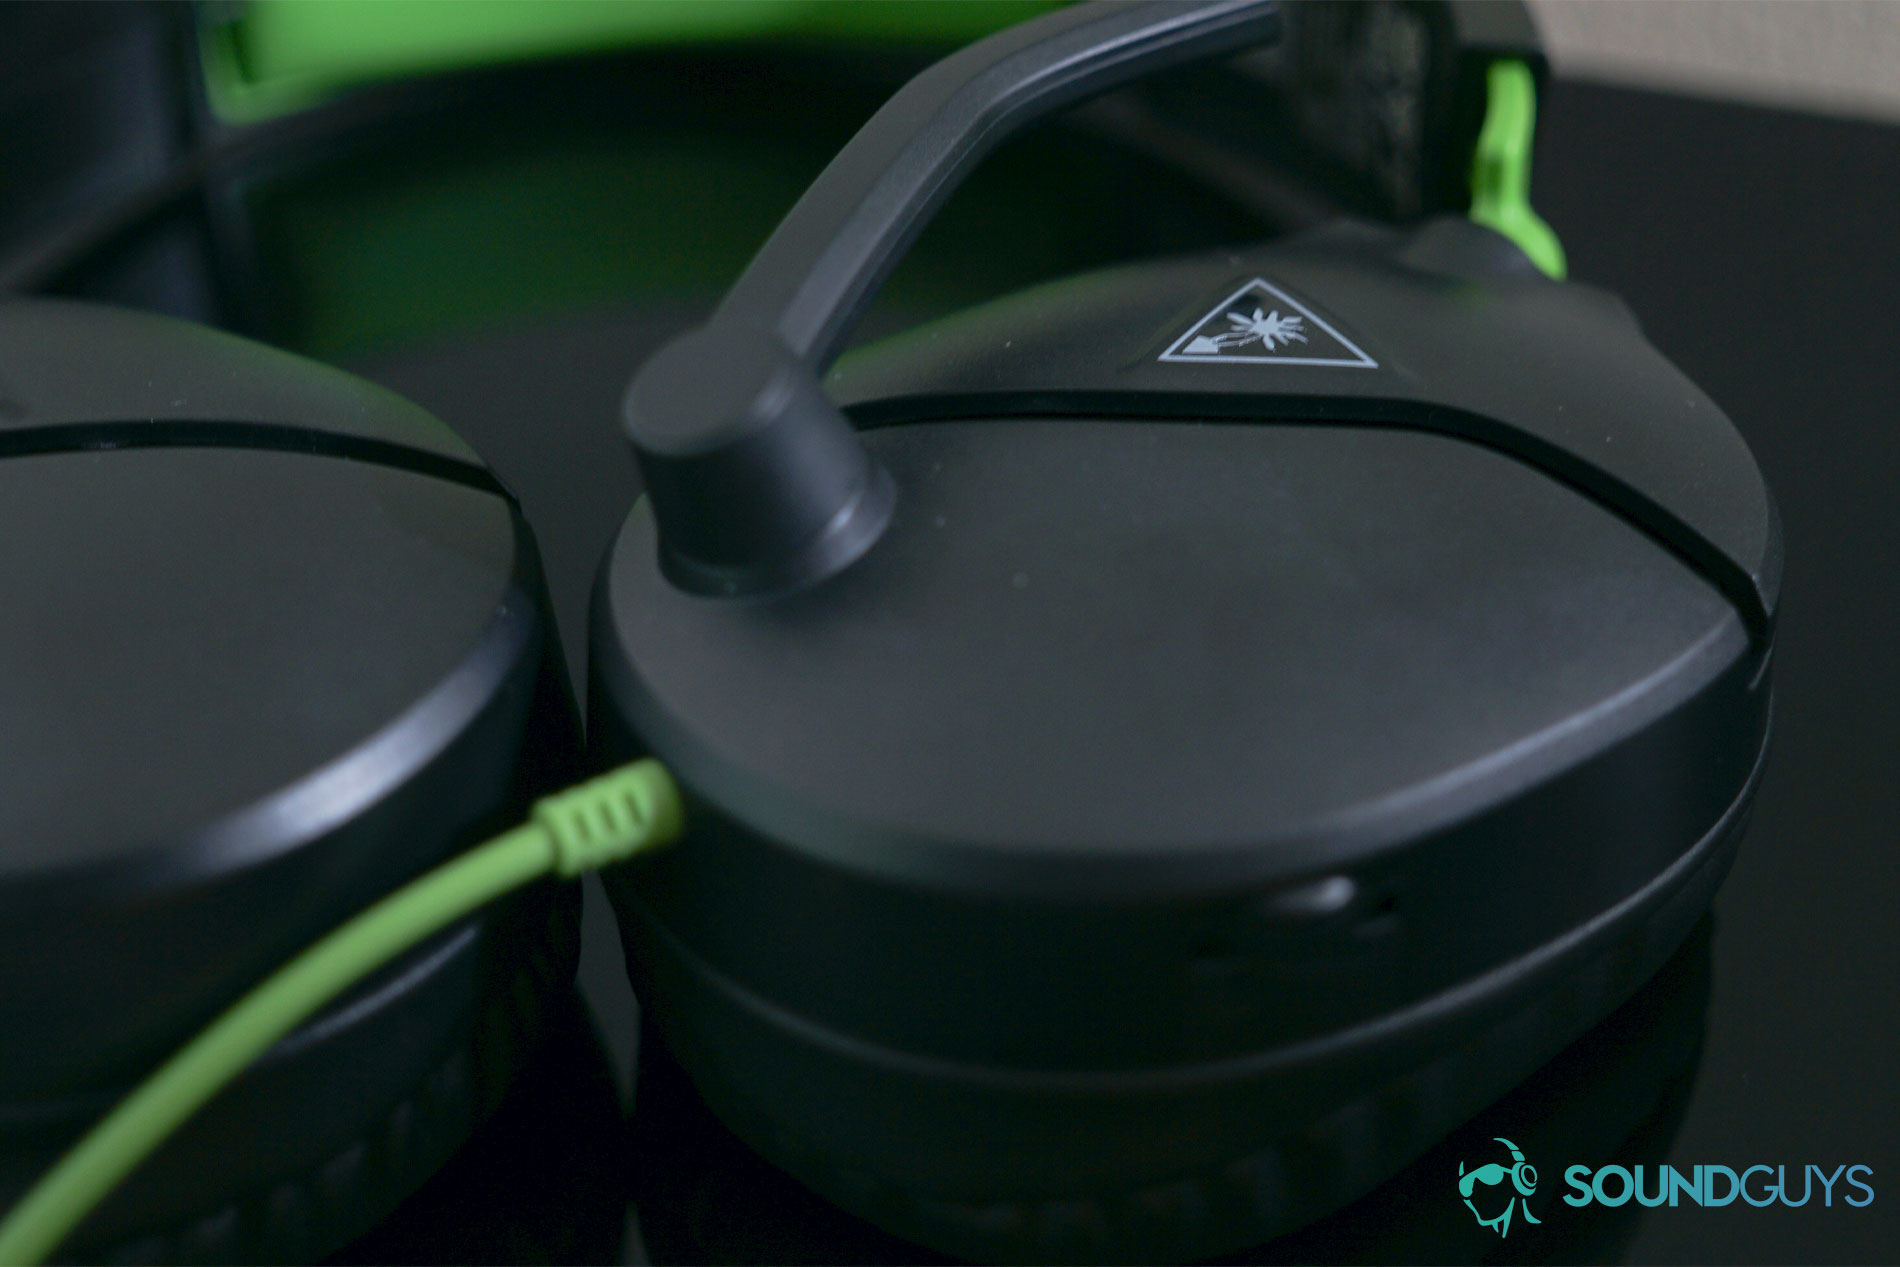 The Turtle Beach Recon 70 gaming headset lays on a black surface with its volume dial and microphone in focus.